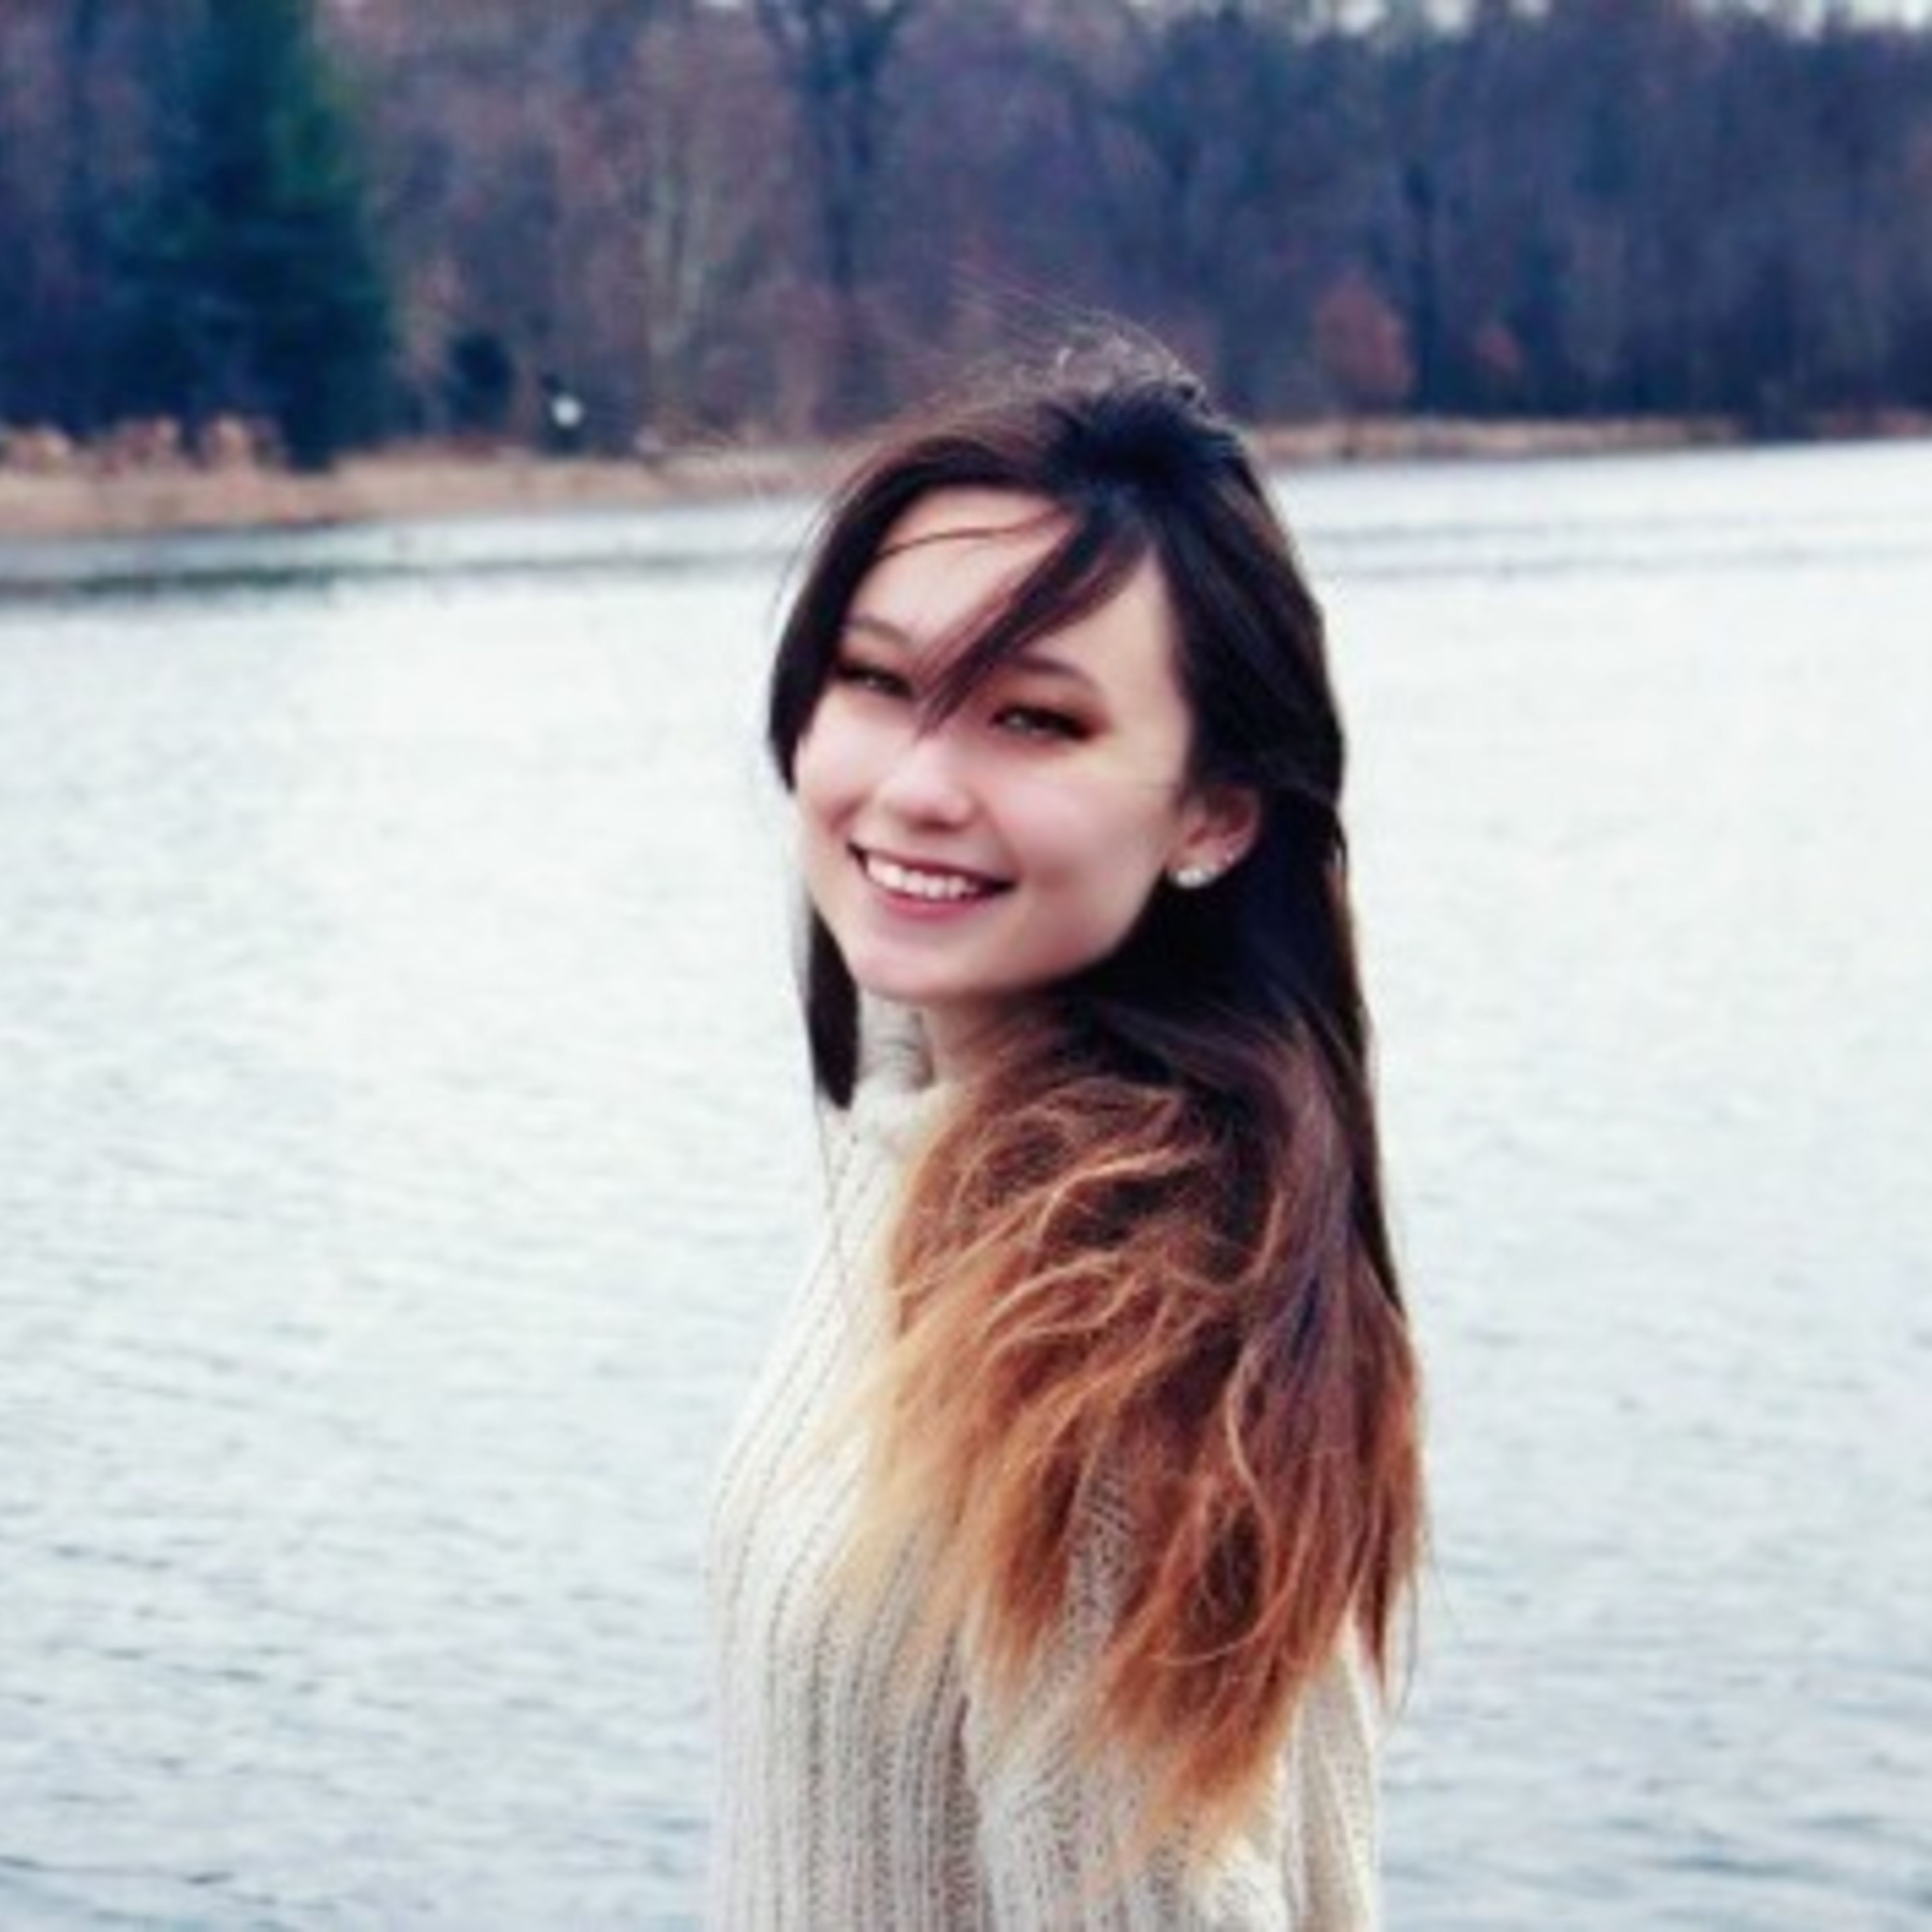 Amelia smiling, turned to the side in front of a lake